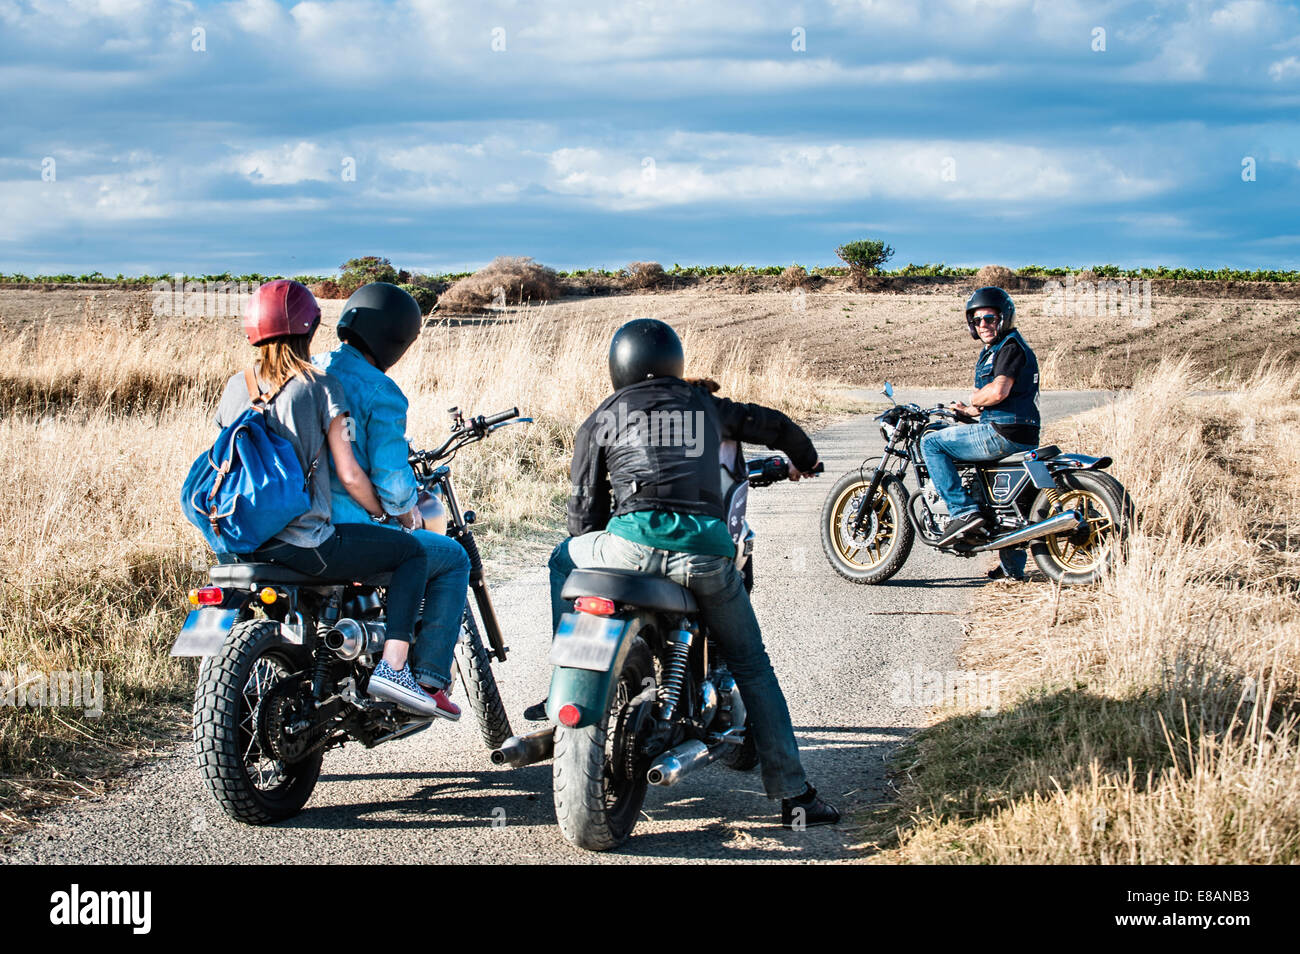 Rear view of four friends chatting on motorcycles on rural road, Cagliari, Sardinia, Italy Stock Photo